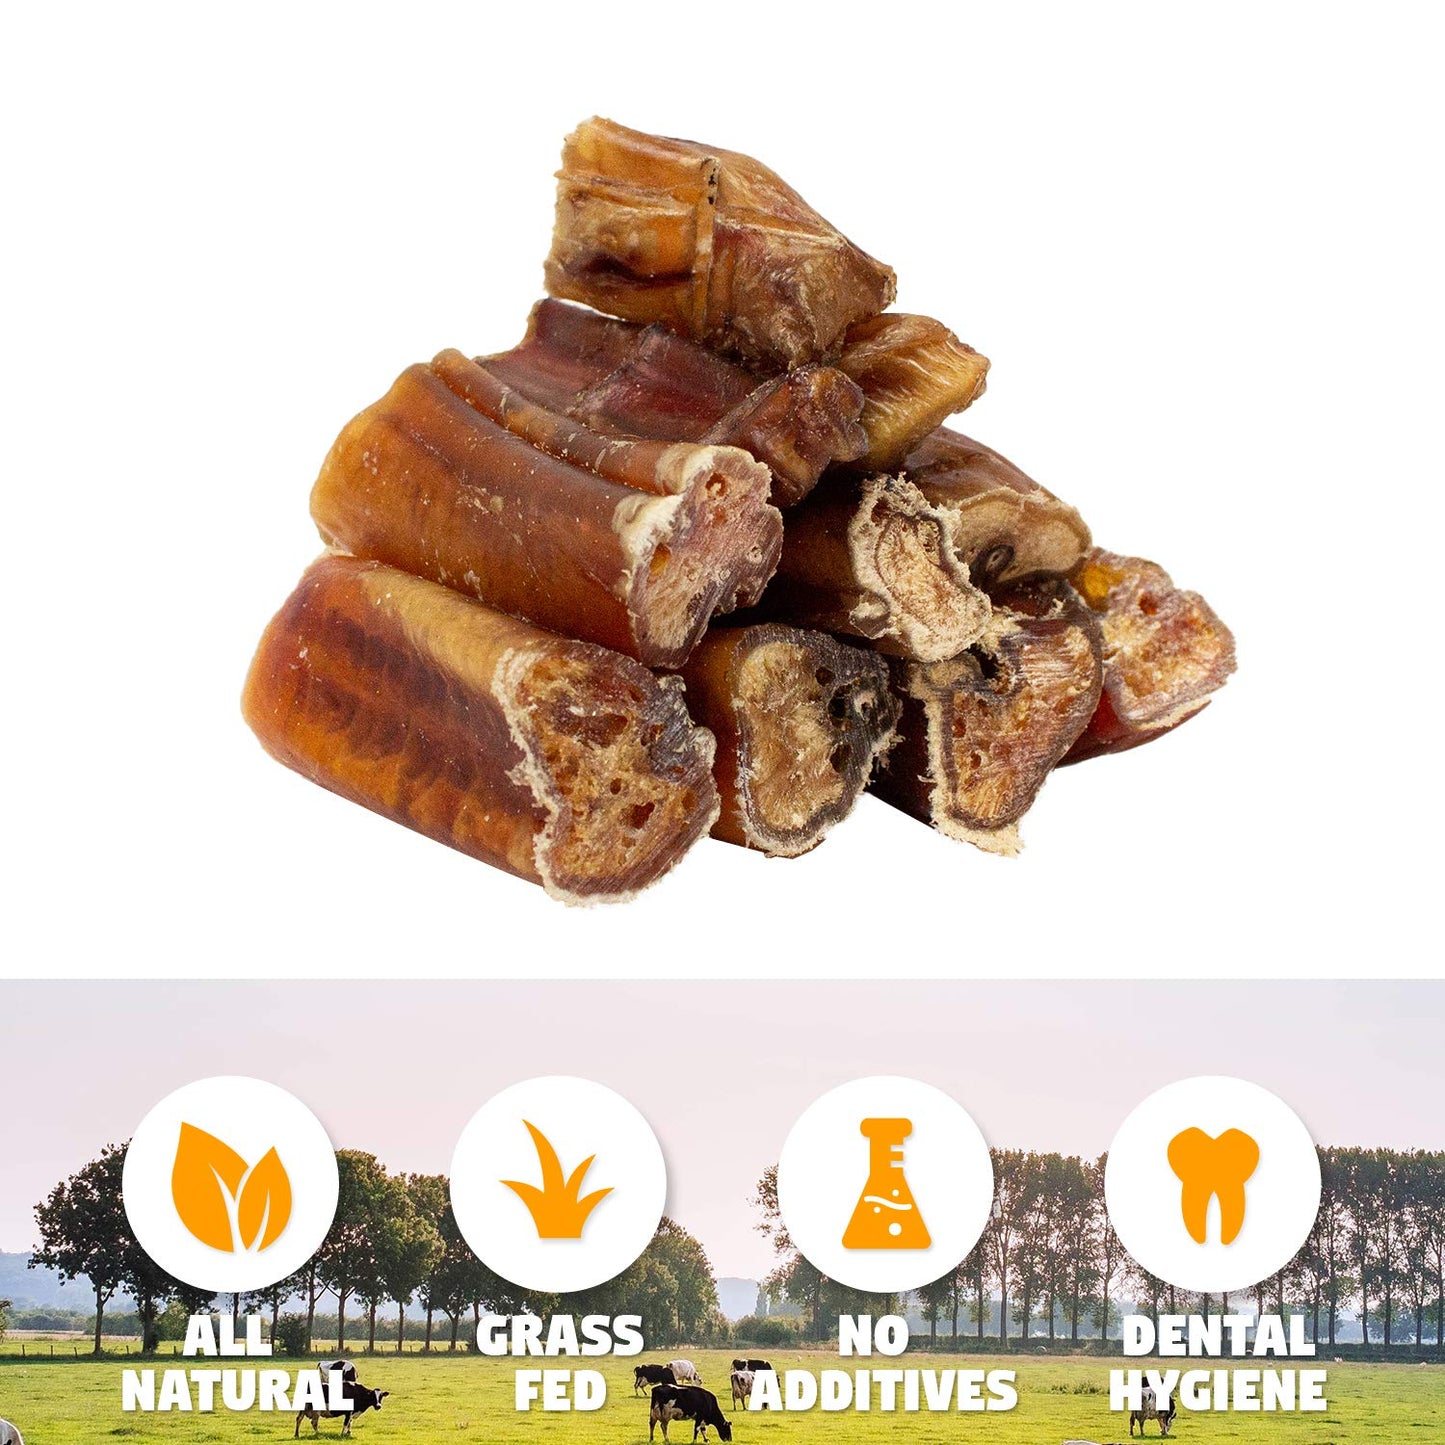 USA Bully Bites, 100% Natural Dog Chew Treat, by the Pound